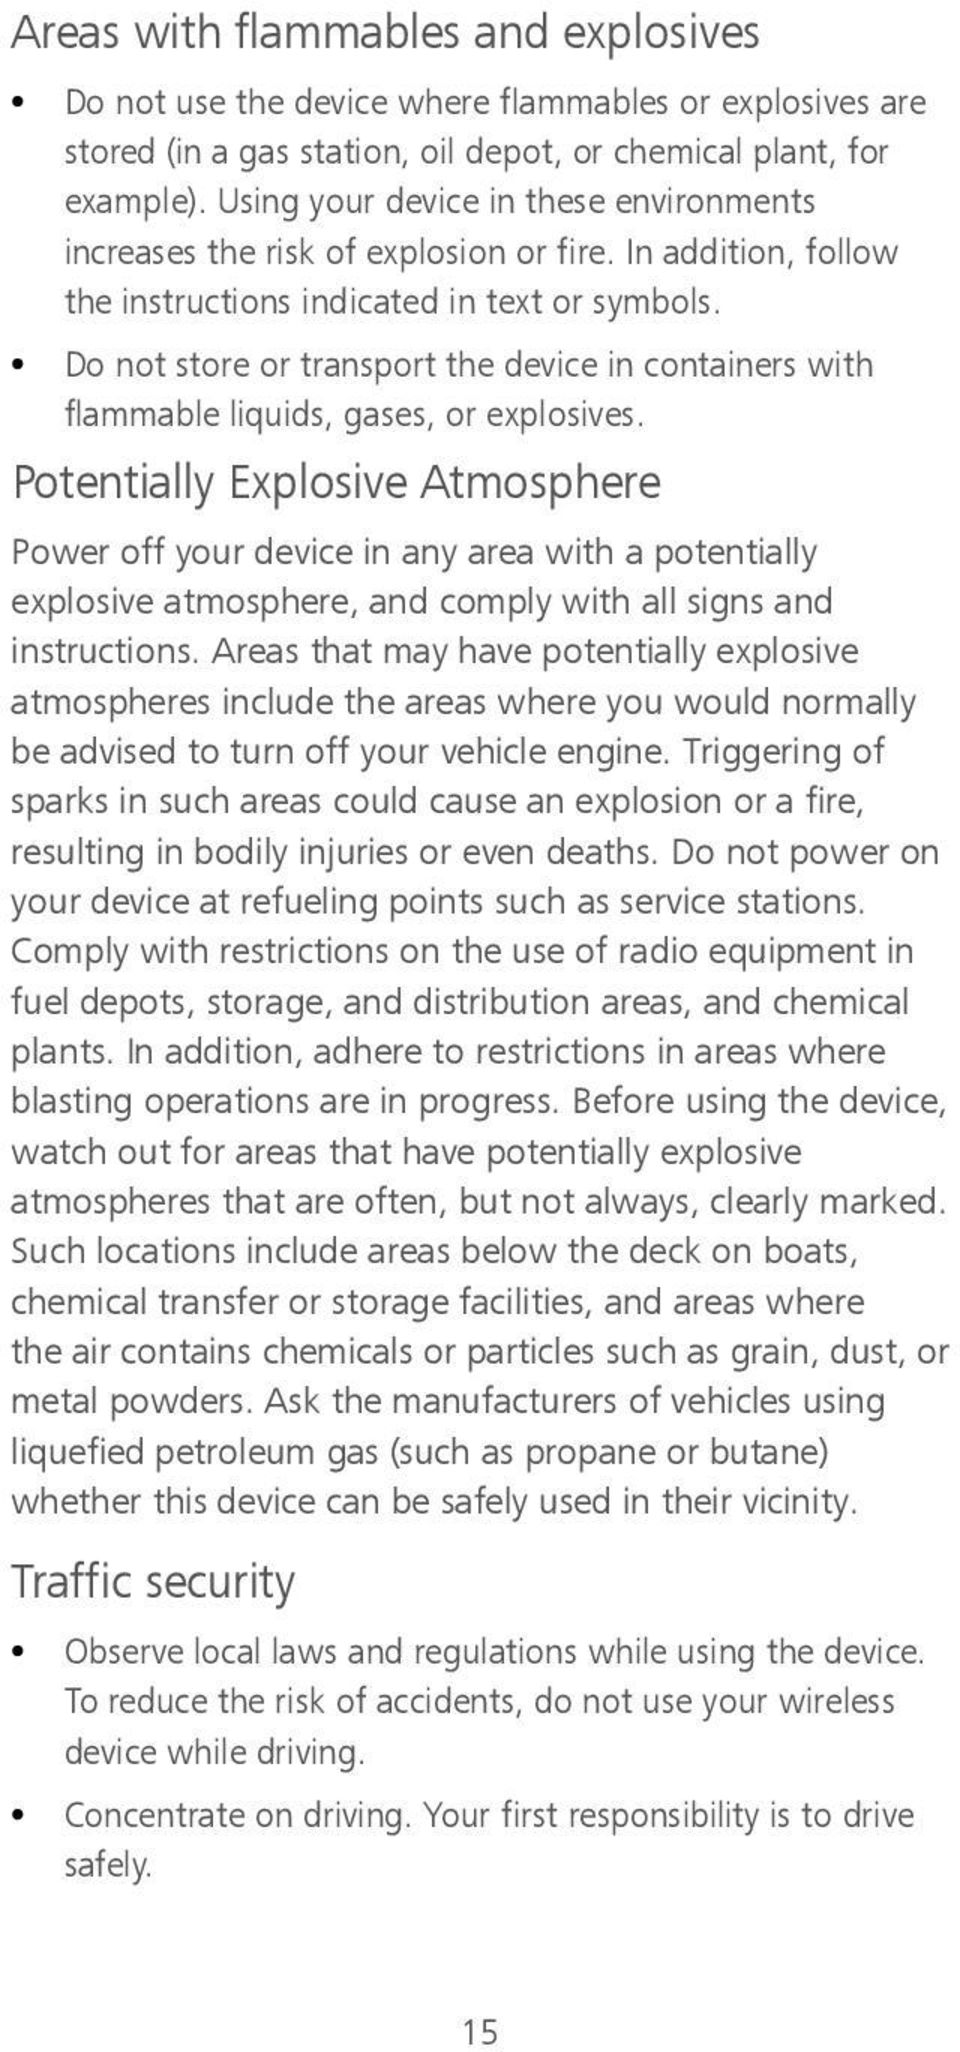 Do not store or transport the device in containers with flammable liquids, gases, or explosives.